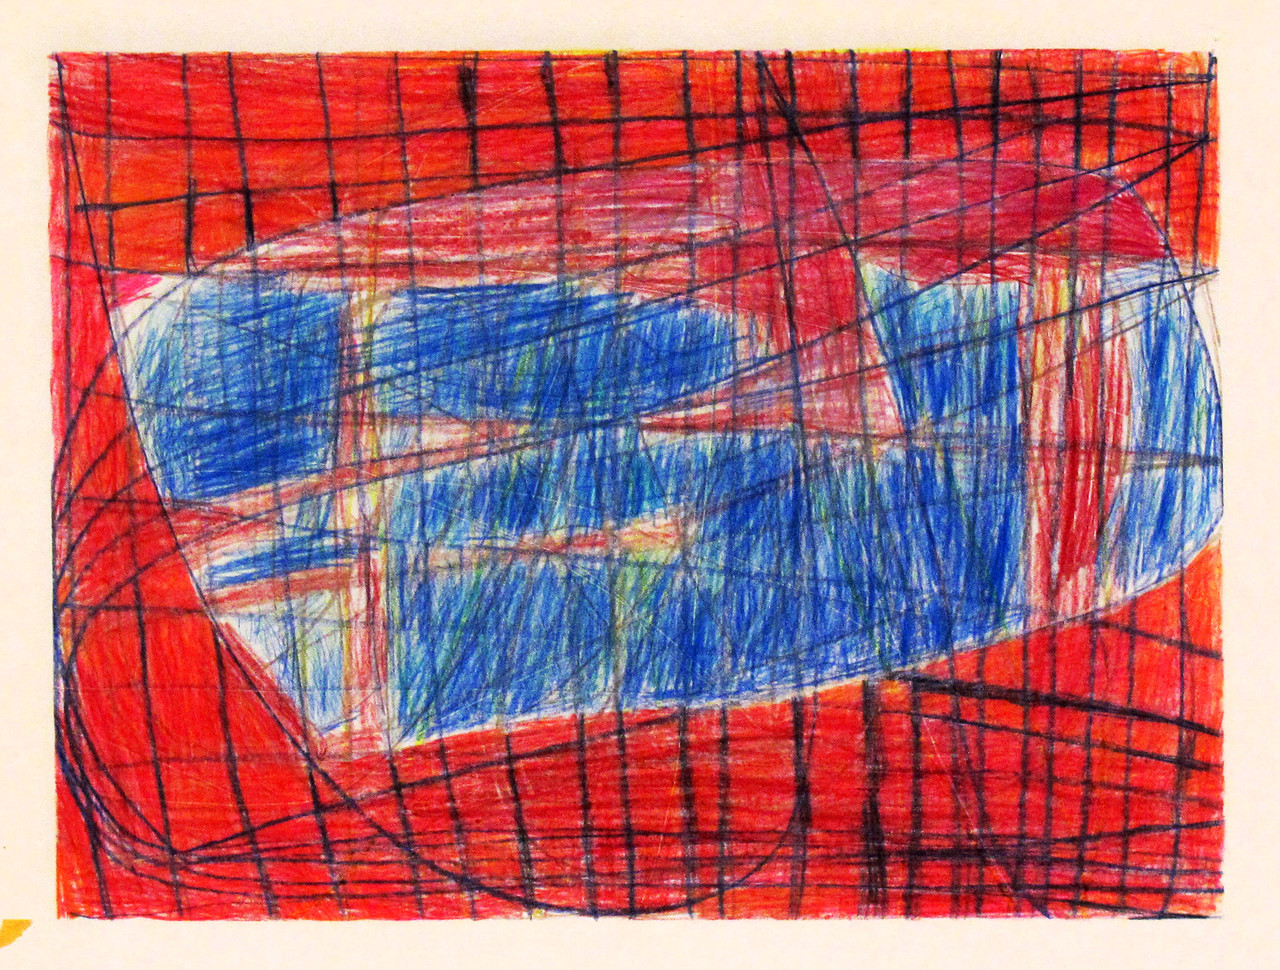 Untitled, 1988, Colored pencil and graphite on paper, 38.7 x 47 cm, BS 011